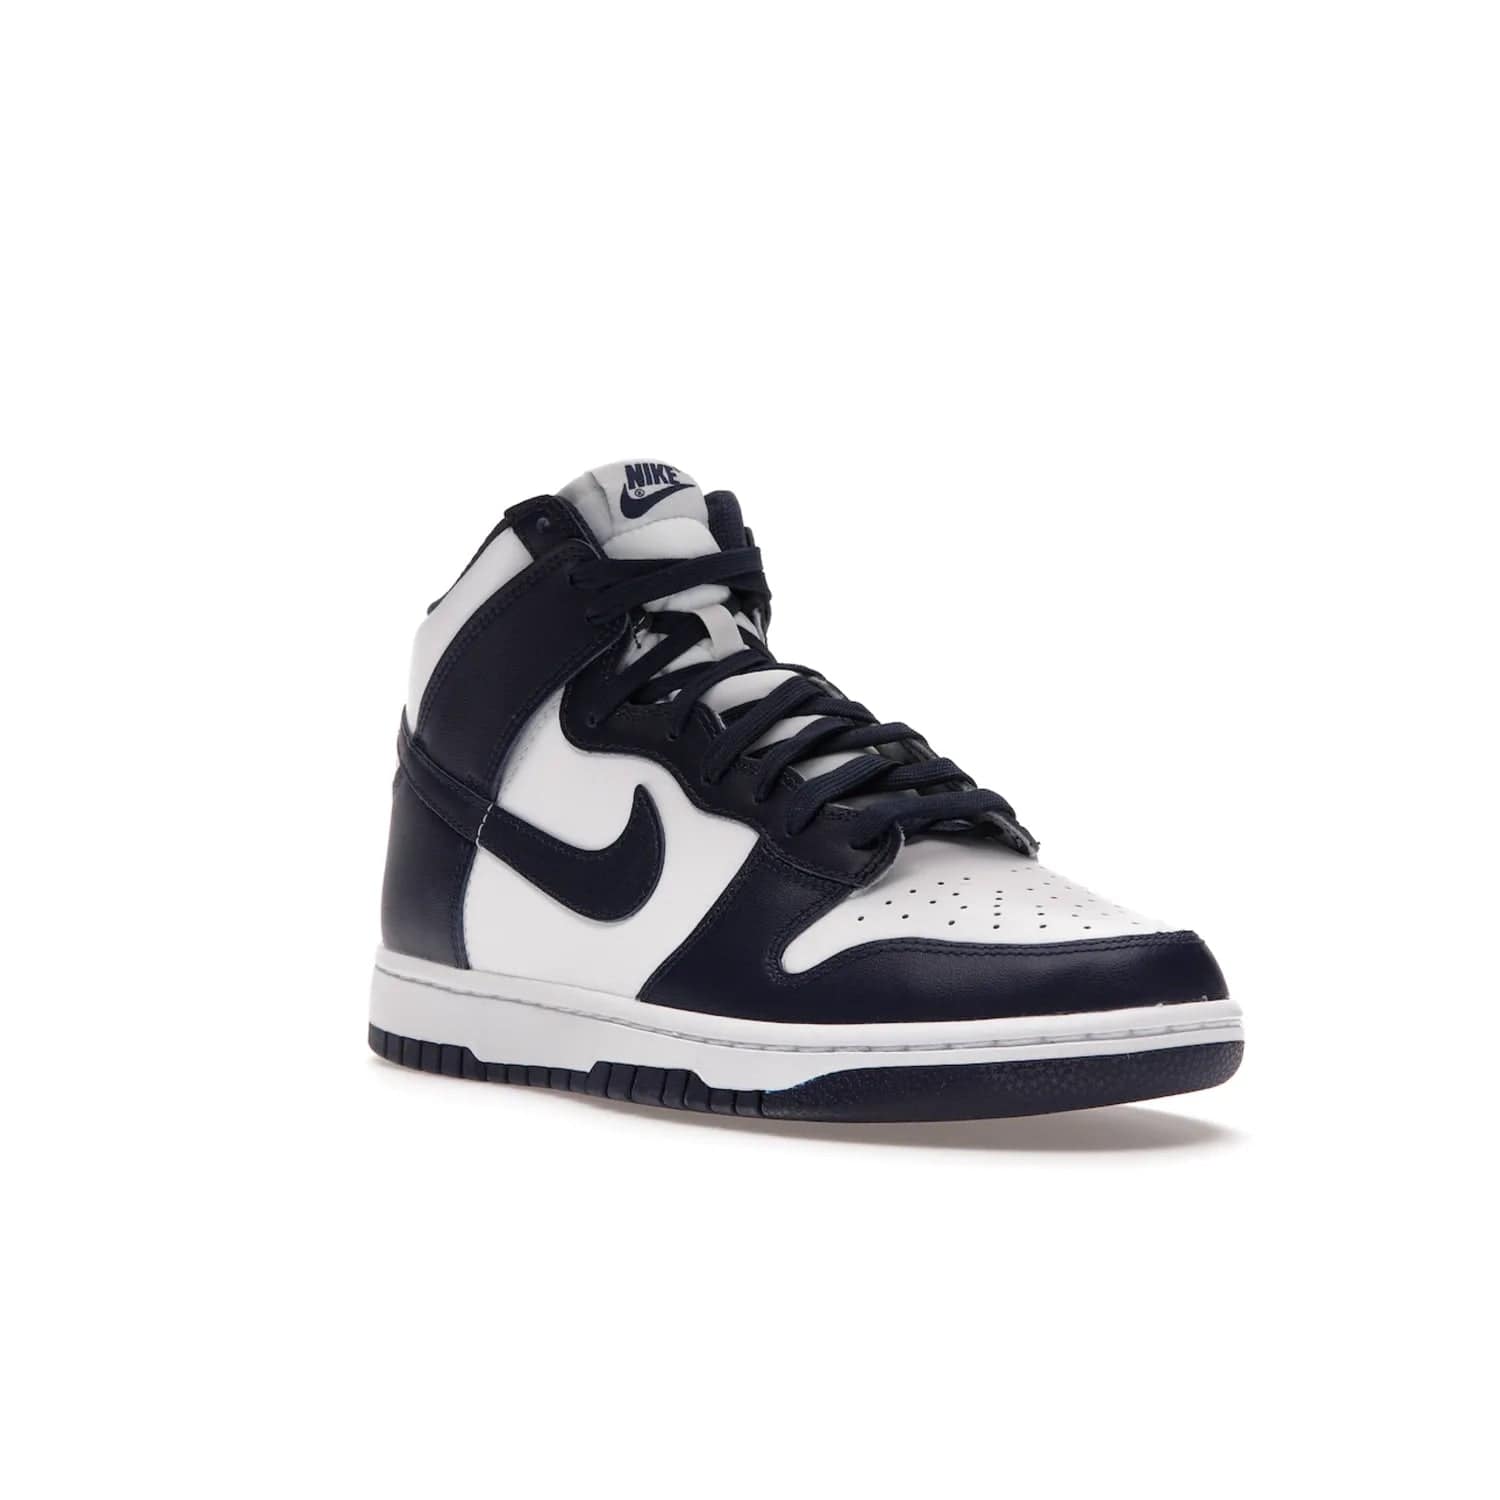 Nike Dunk High Championship Navy - Image 6 - Only at www.BallersClubKickz.com - Classic athletic style meets striking color-blocking on the Nike Dunk High Championship Navy. A white leather upper with Championship Navy overlays creates a retro look with a woven tongue label and sole. Unleash your inner champion with the Nike Dunk High Championship Navy.